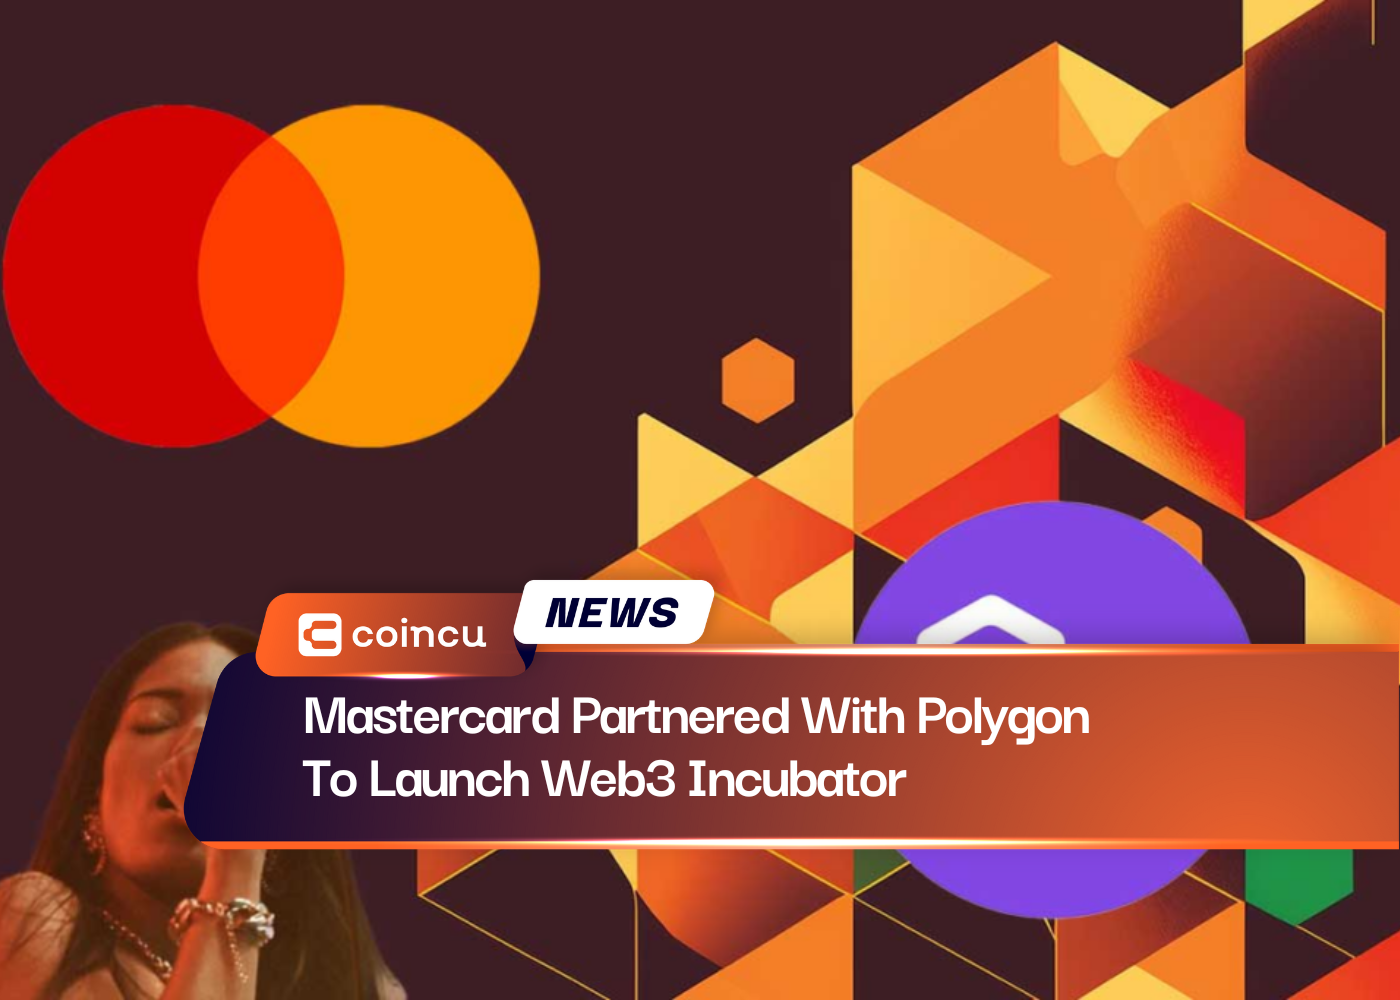 Mastercard Partnered With Polygon To Launch Web3 Incubator